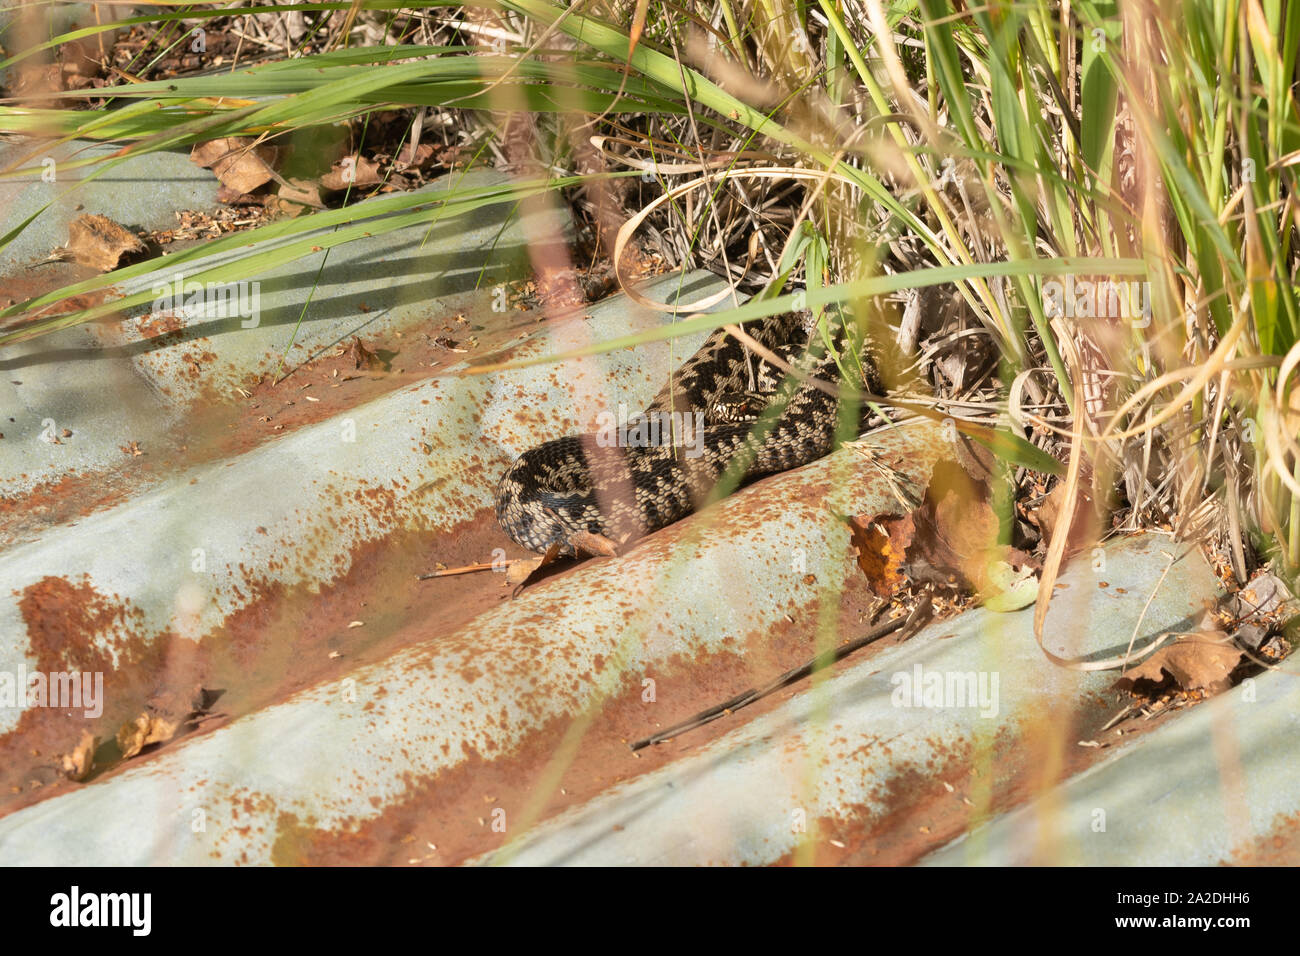 Male adder (Vipera berus) basking on top of a corrugated iron refugia or tin used for reptile survey purposes, UK Stock Photo